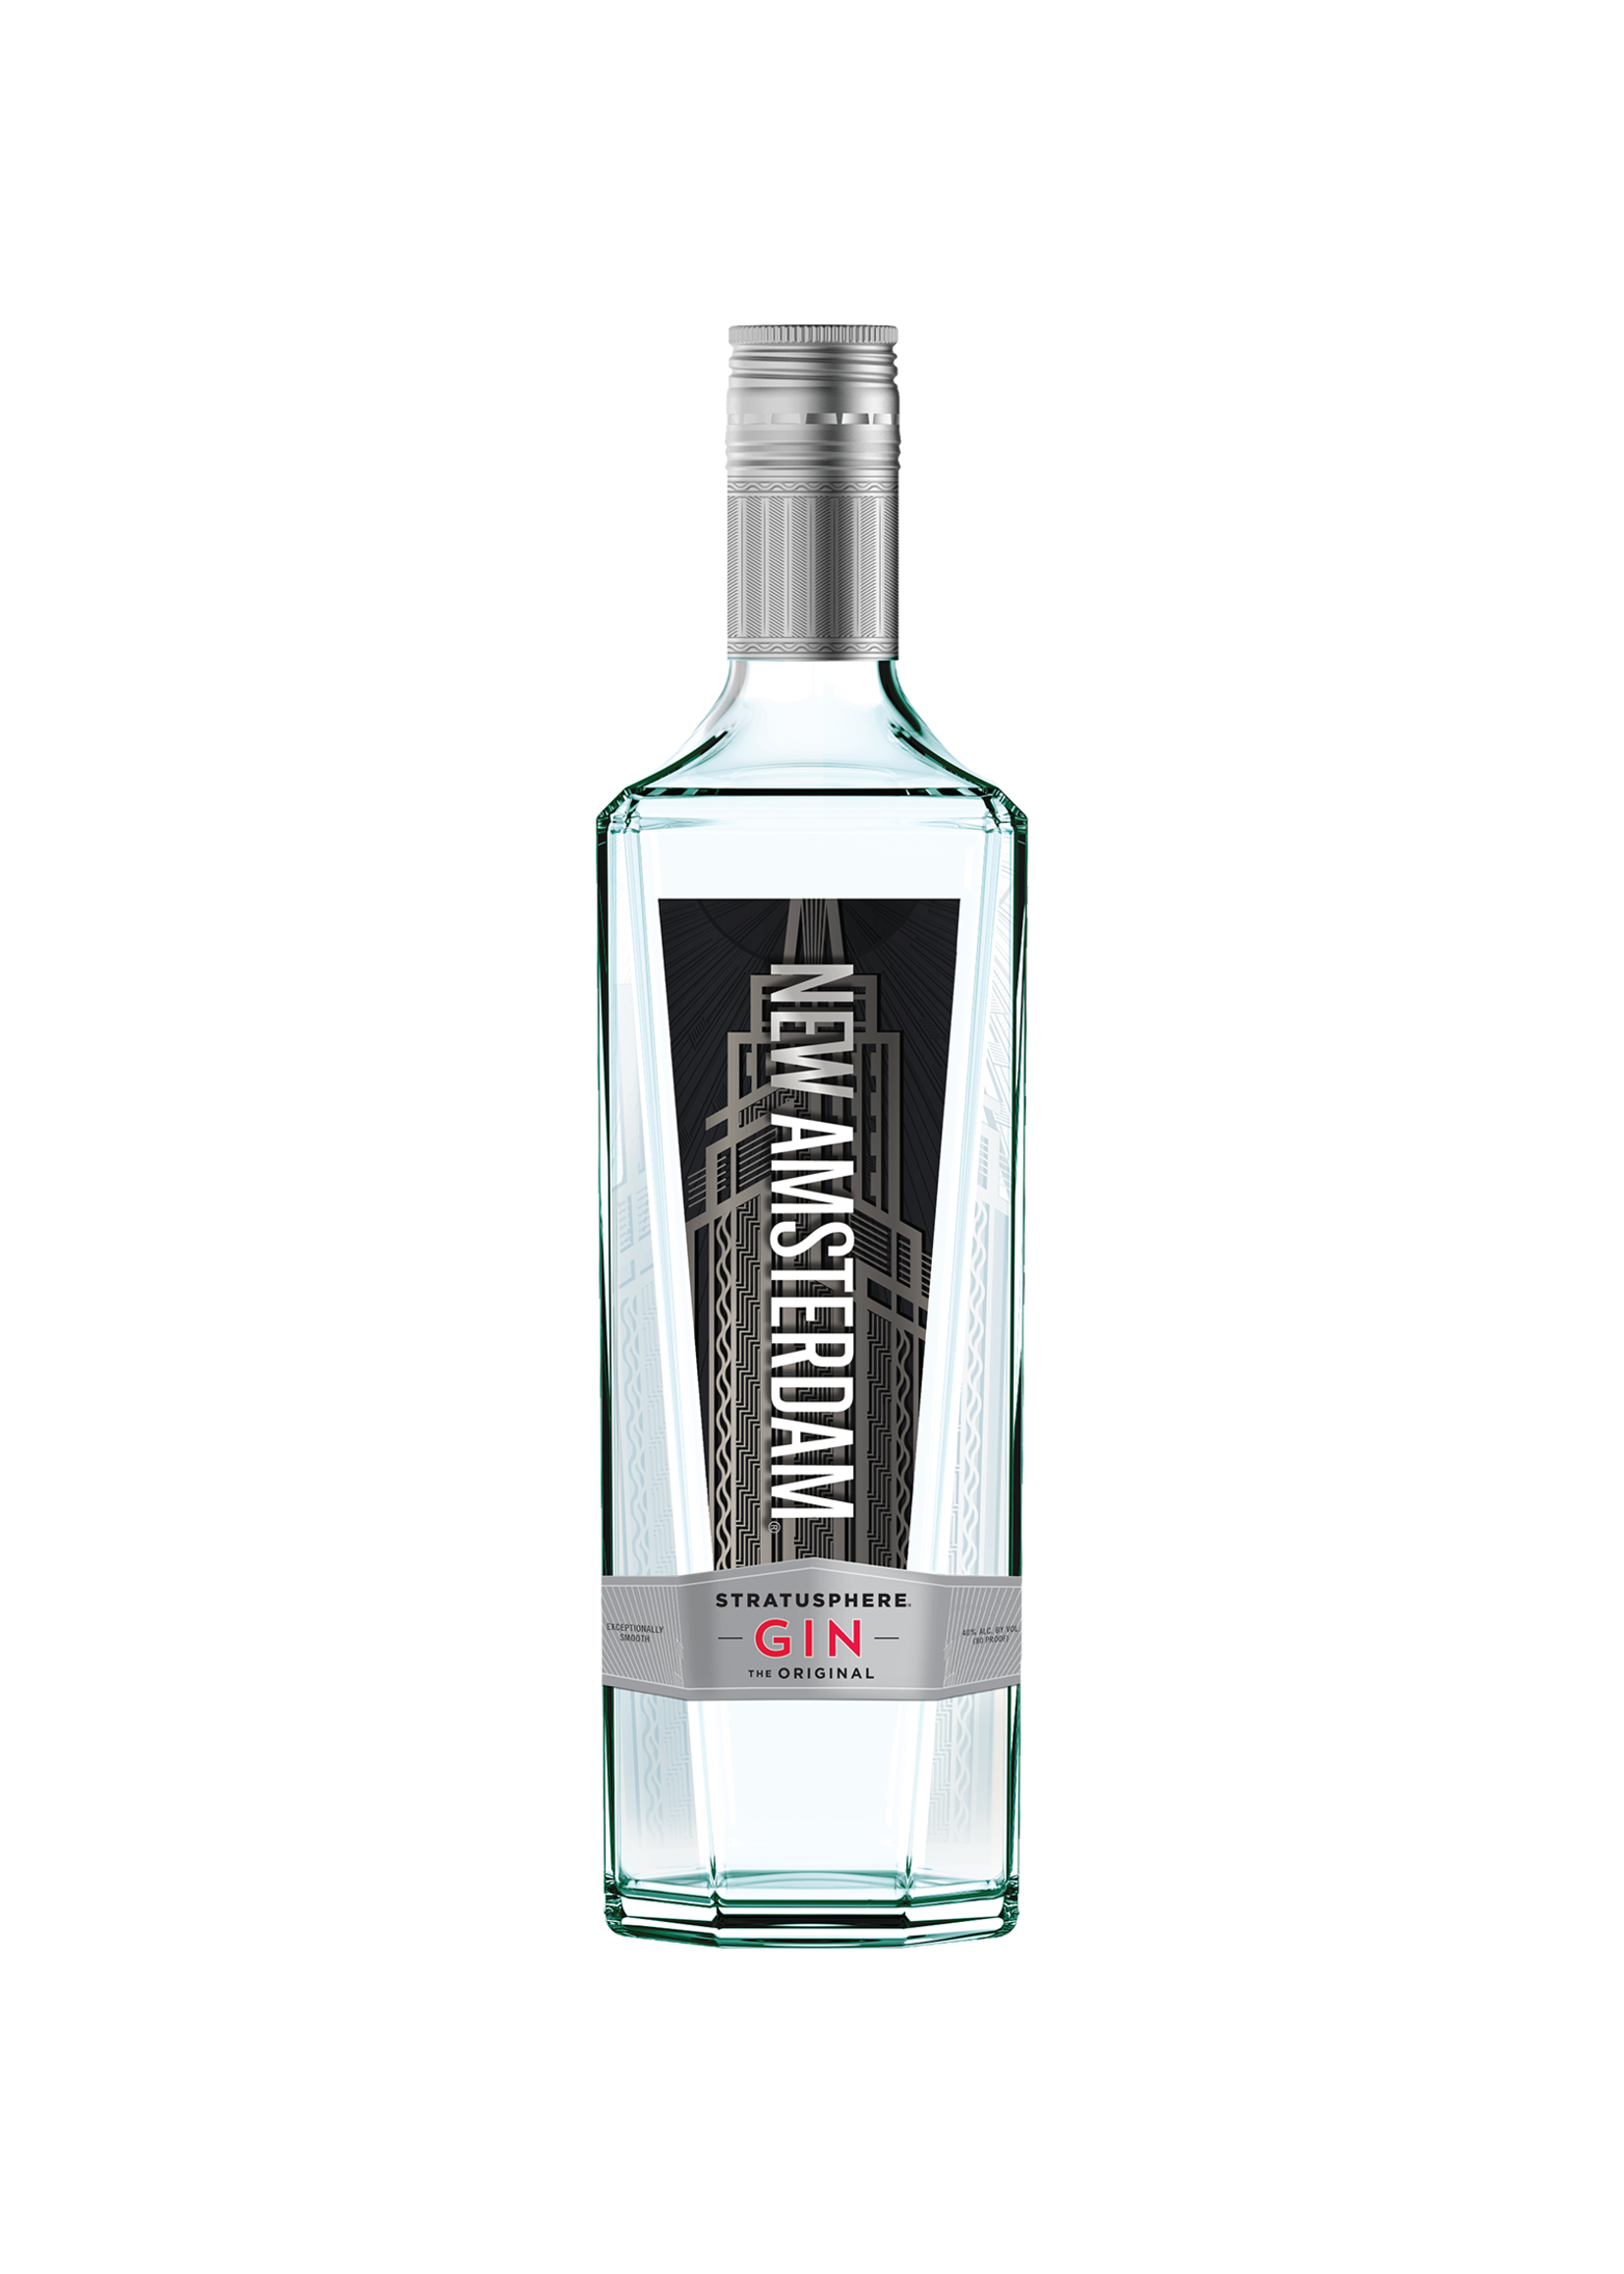 New Amsterdam Gin 80Proof 1 Ltr